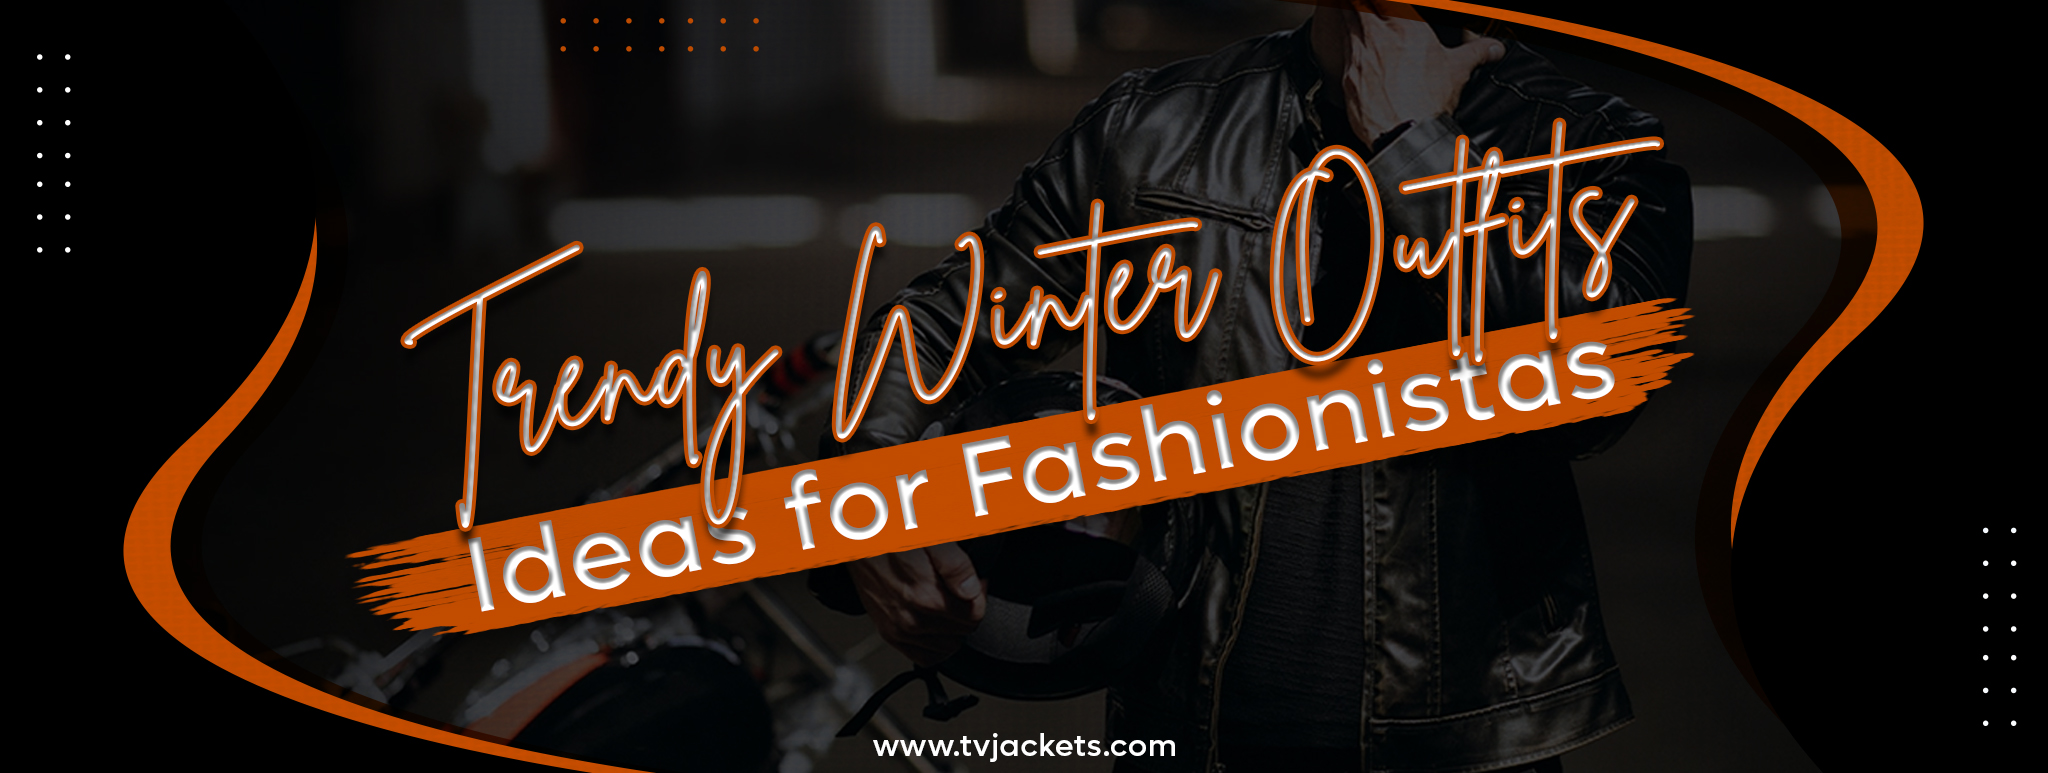 Trendy Winter Outfits Ideas for Fashionistas